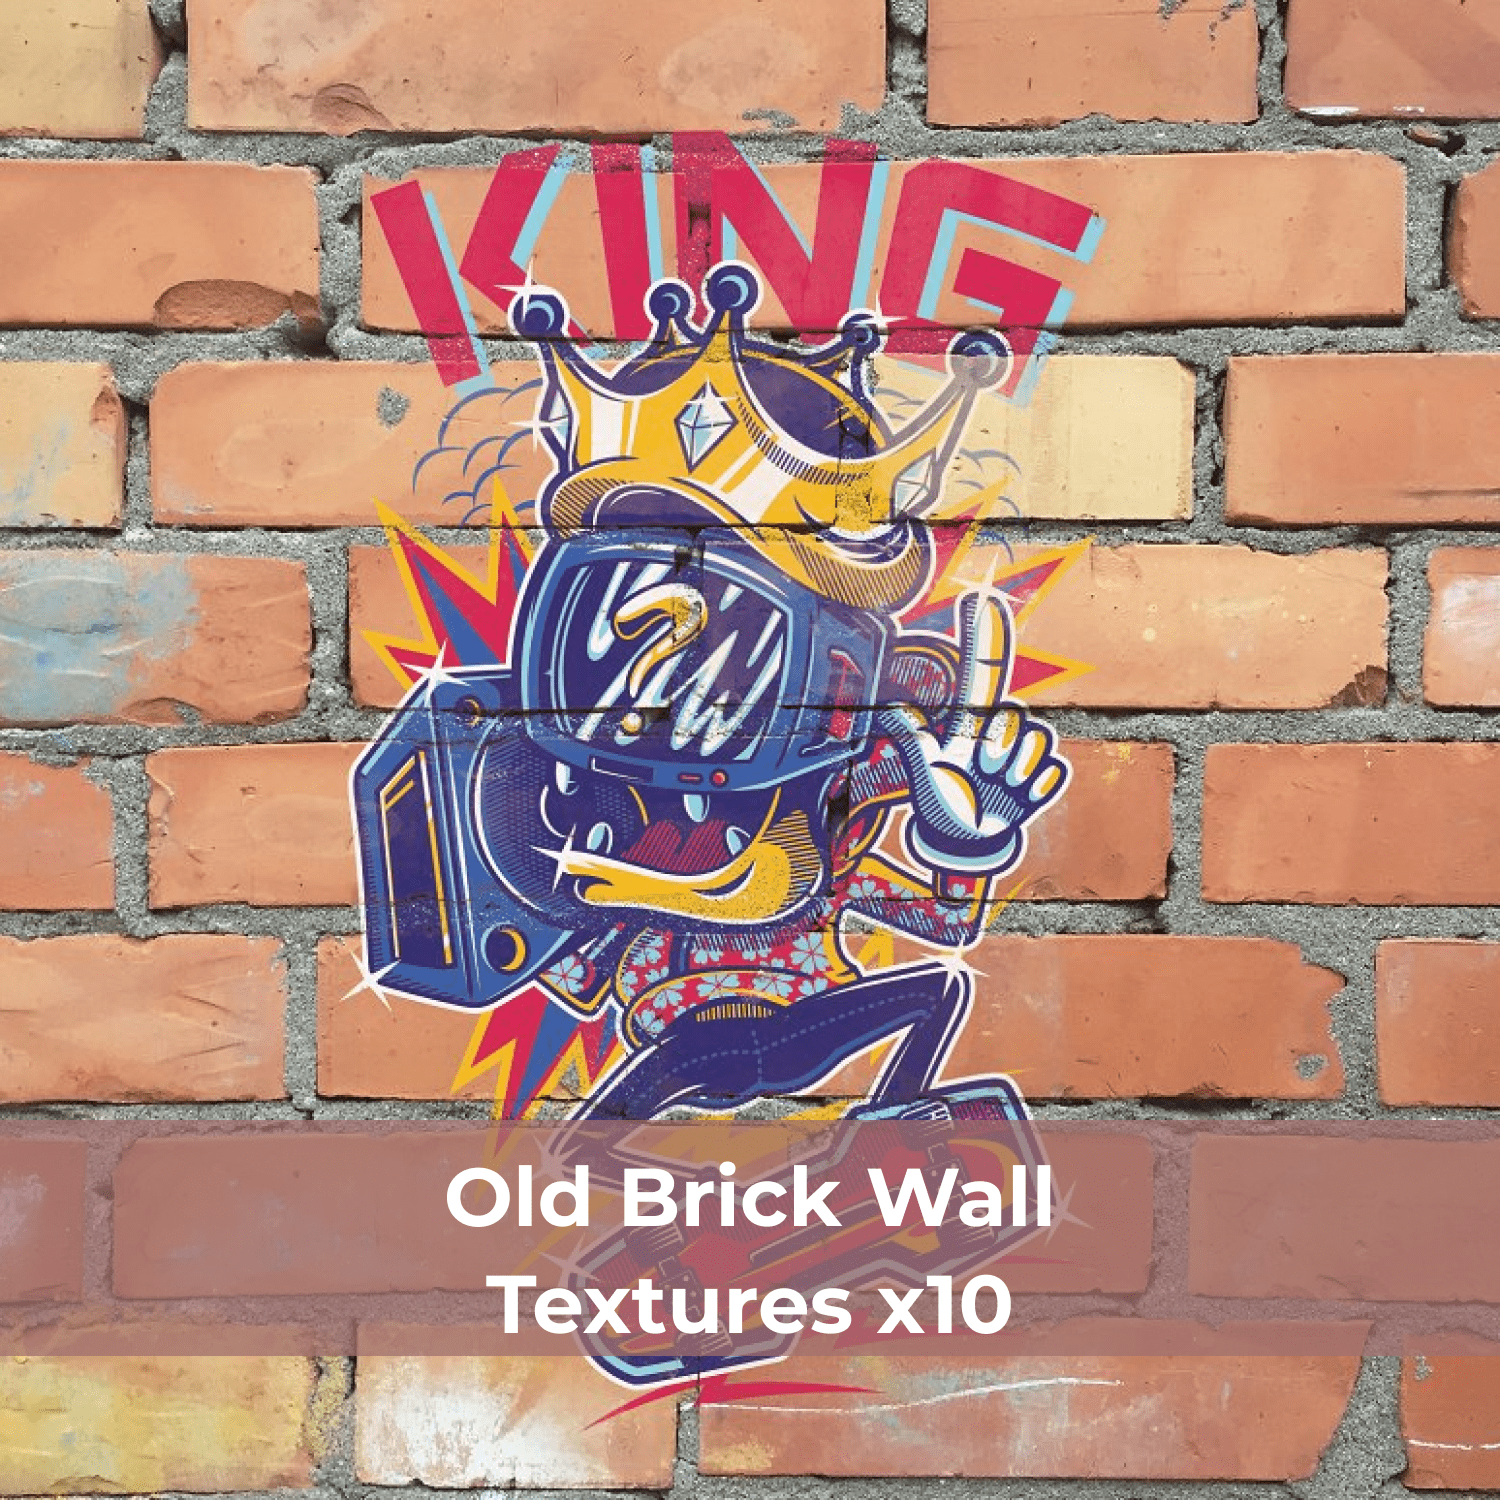 Old Brick Wall Textures x10 cover.